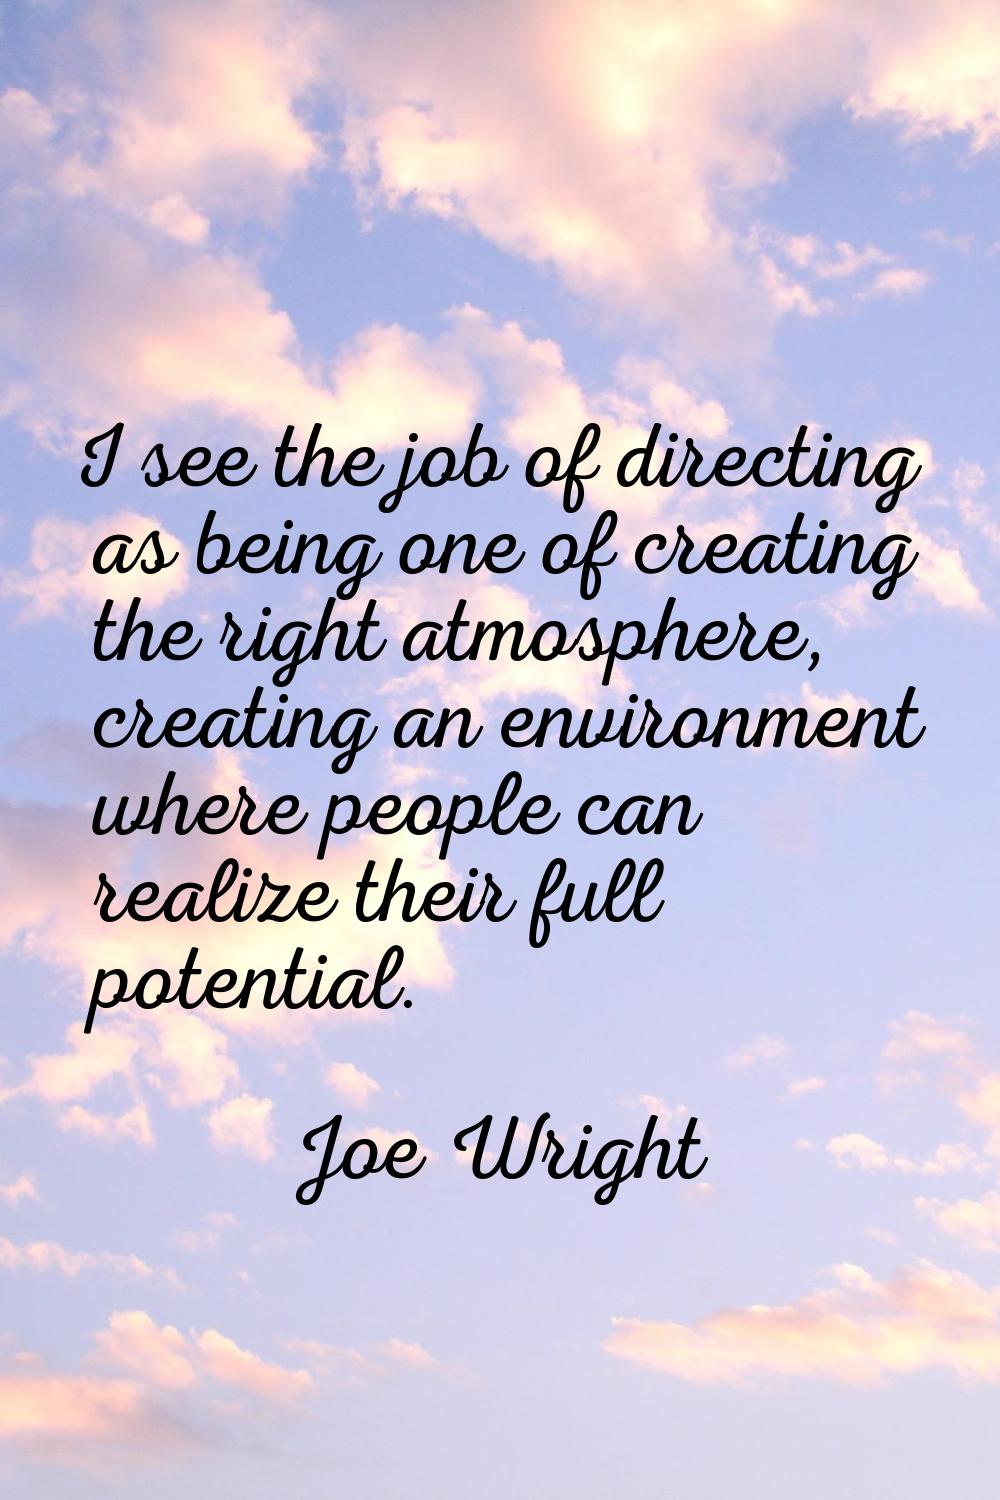 I see the job of directing as being one of creating the right atmosphere, creating an environment w